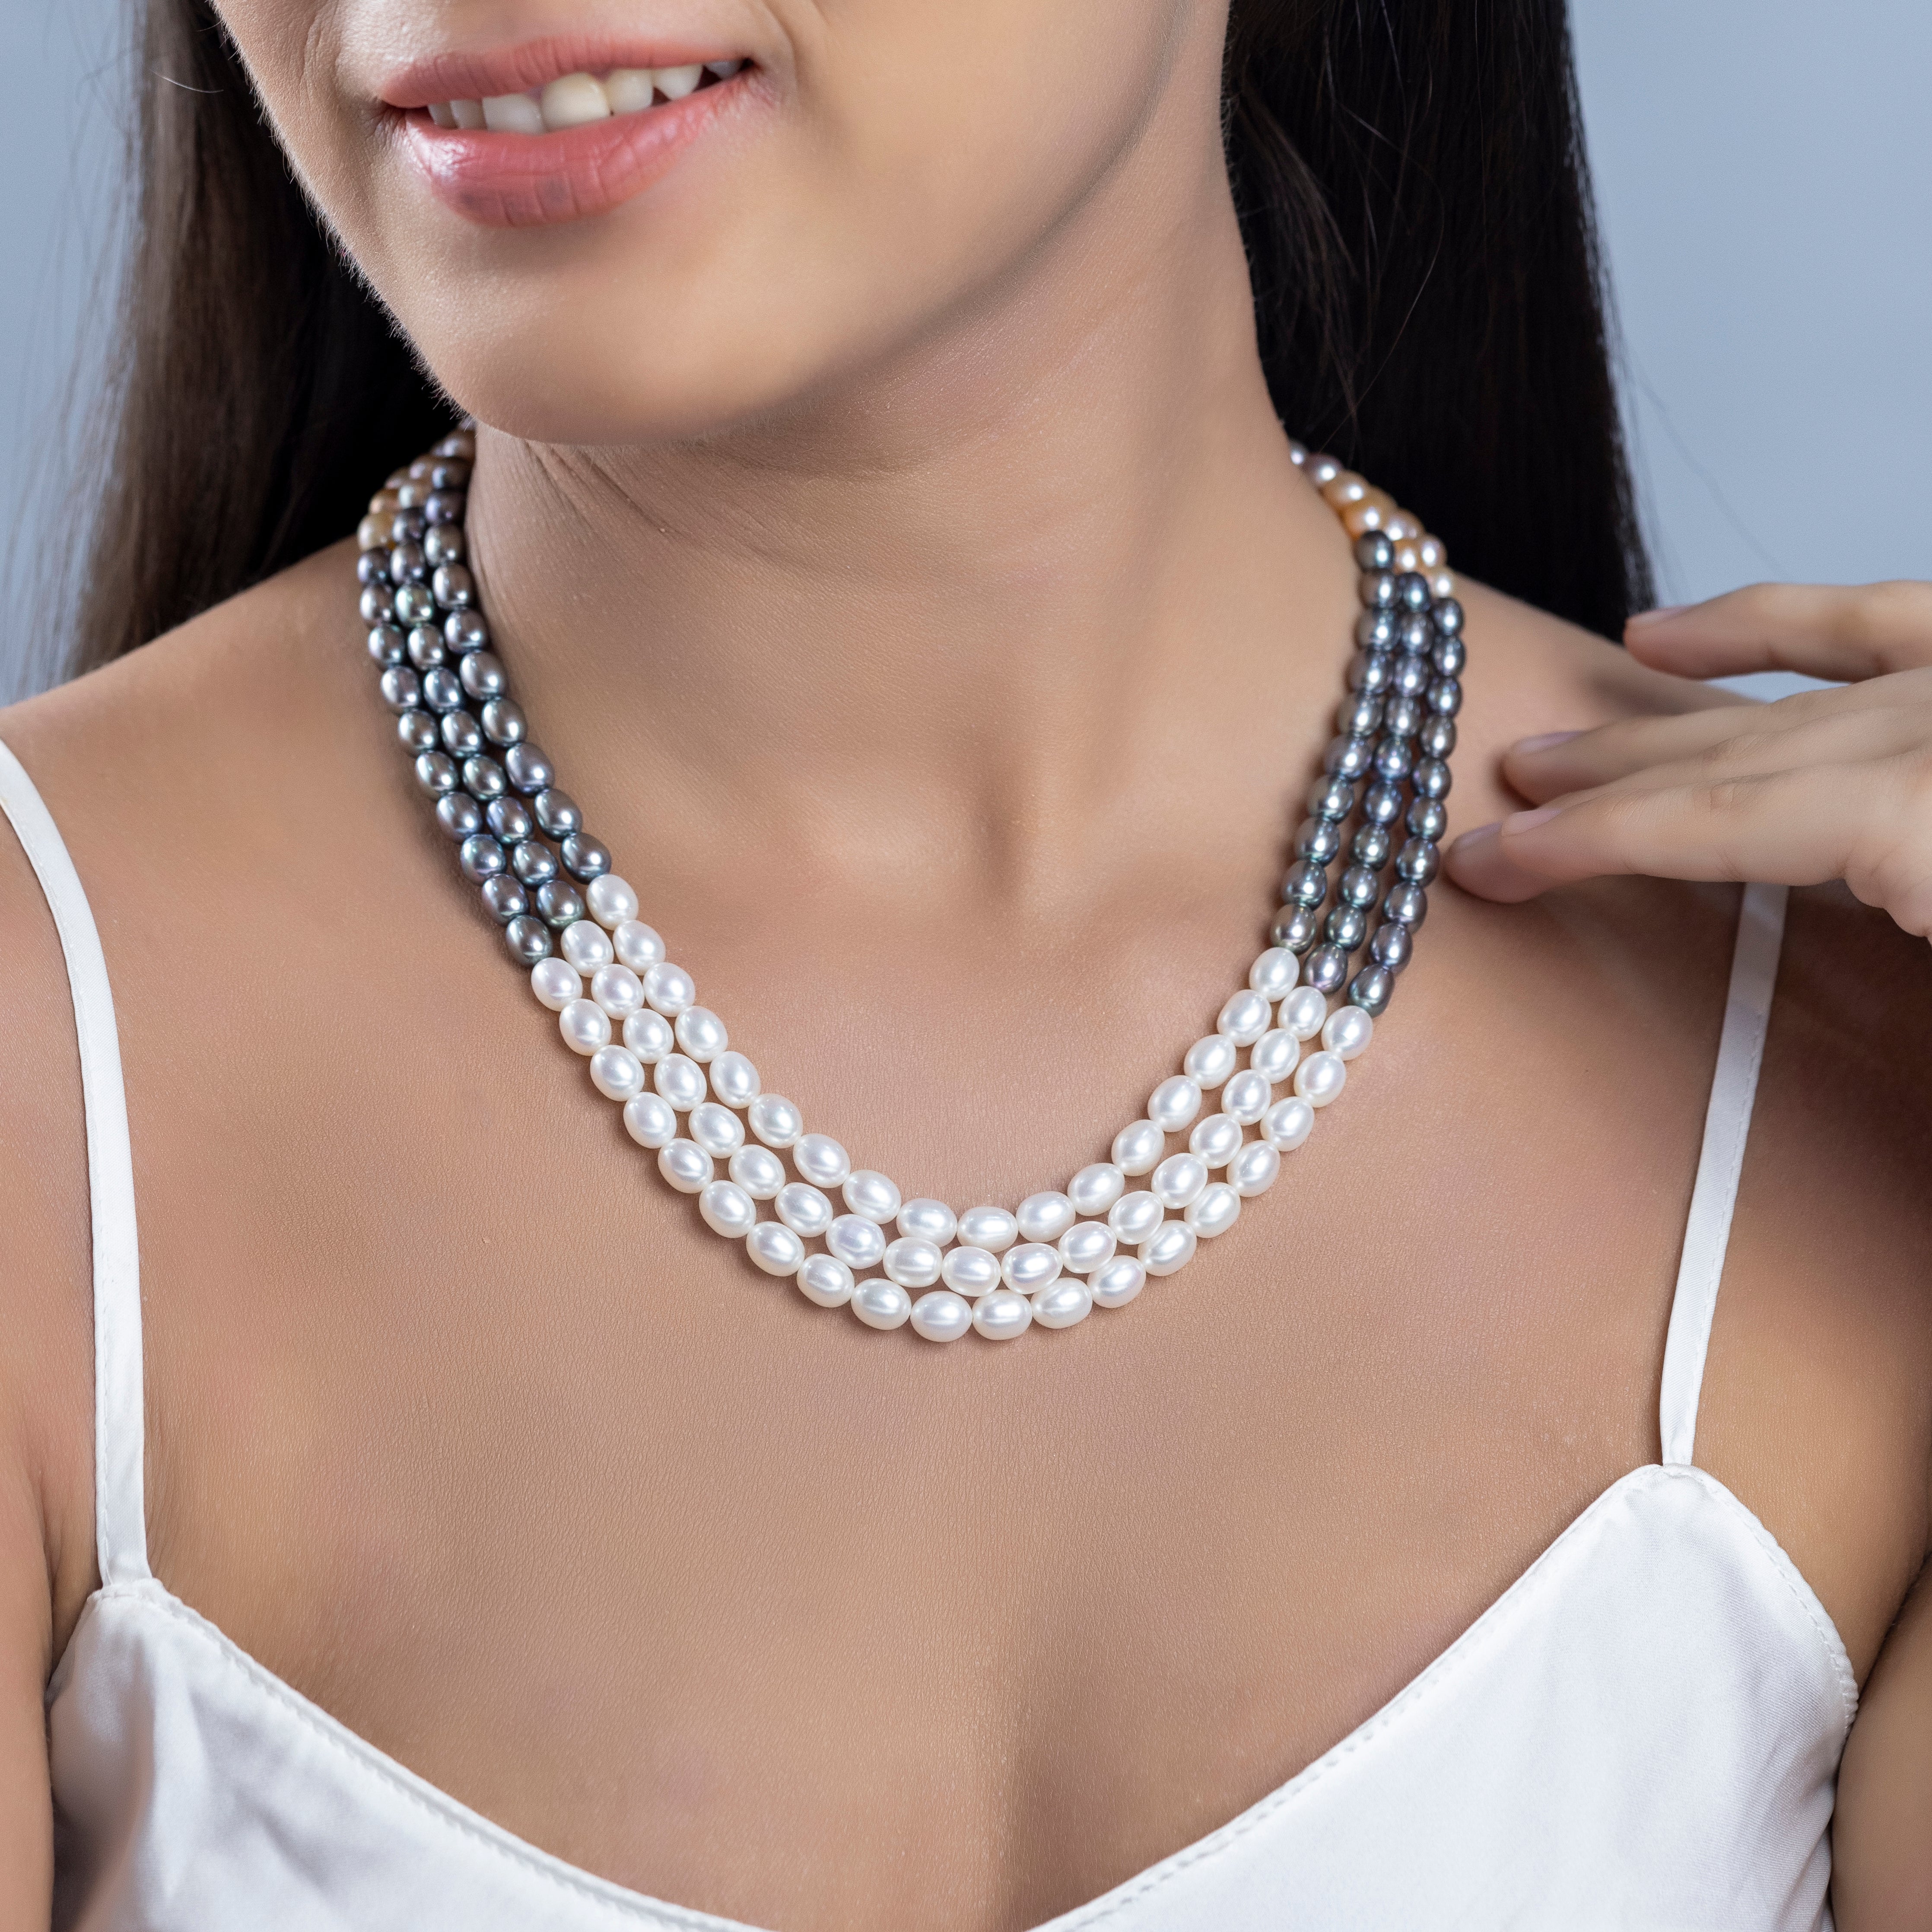 Monochrome Chic Oval 3-Line Freshwater Pearl Necklace